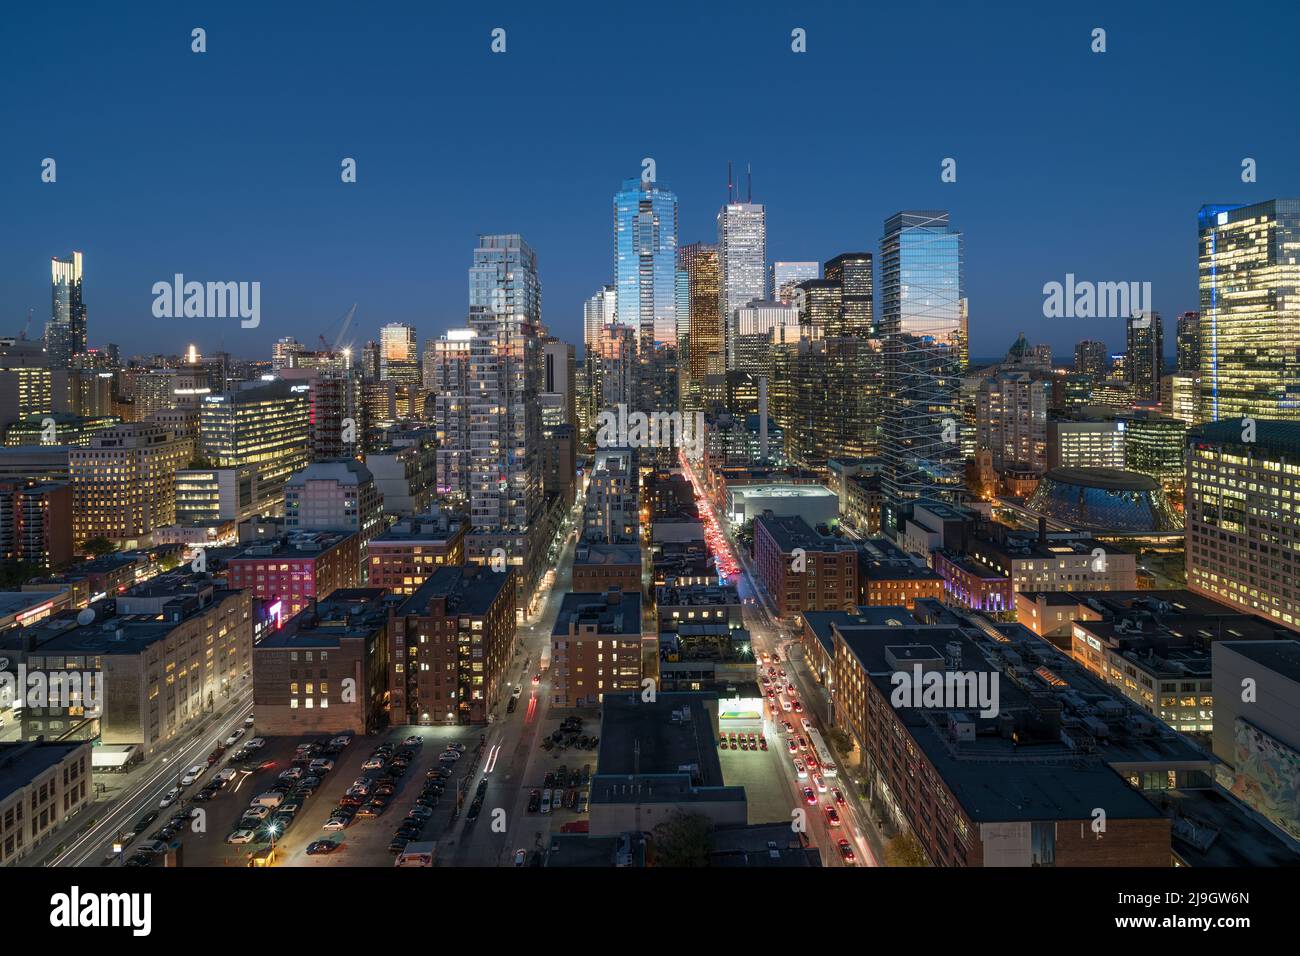 The financial district of Toronto Canada at dusk Stock Photo